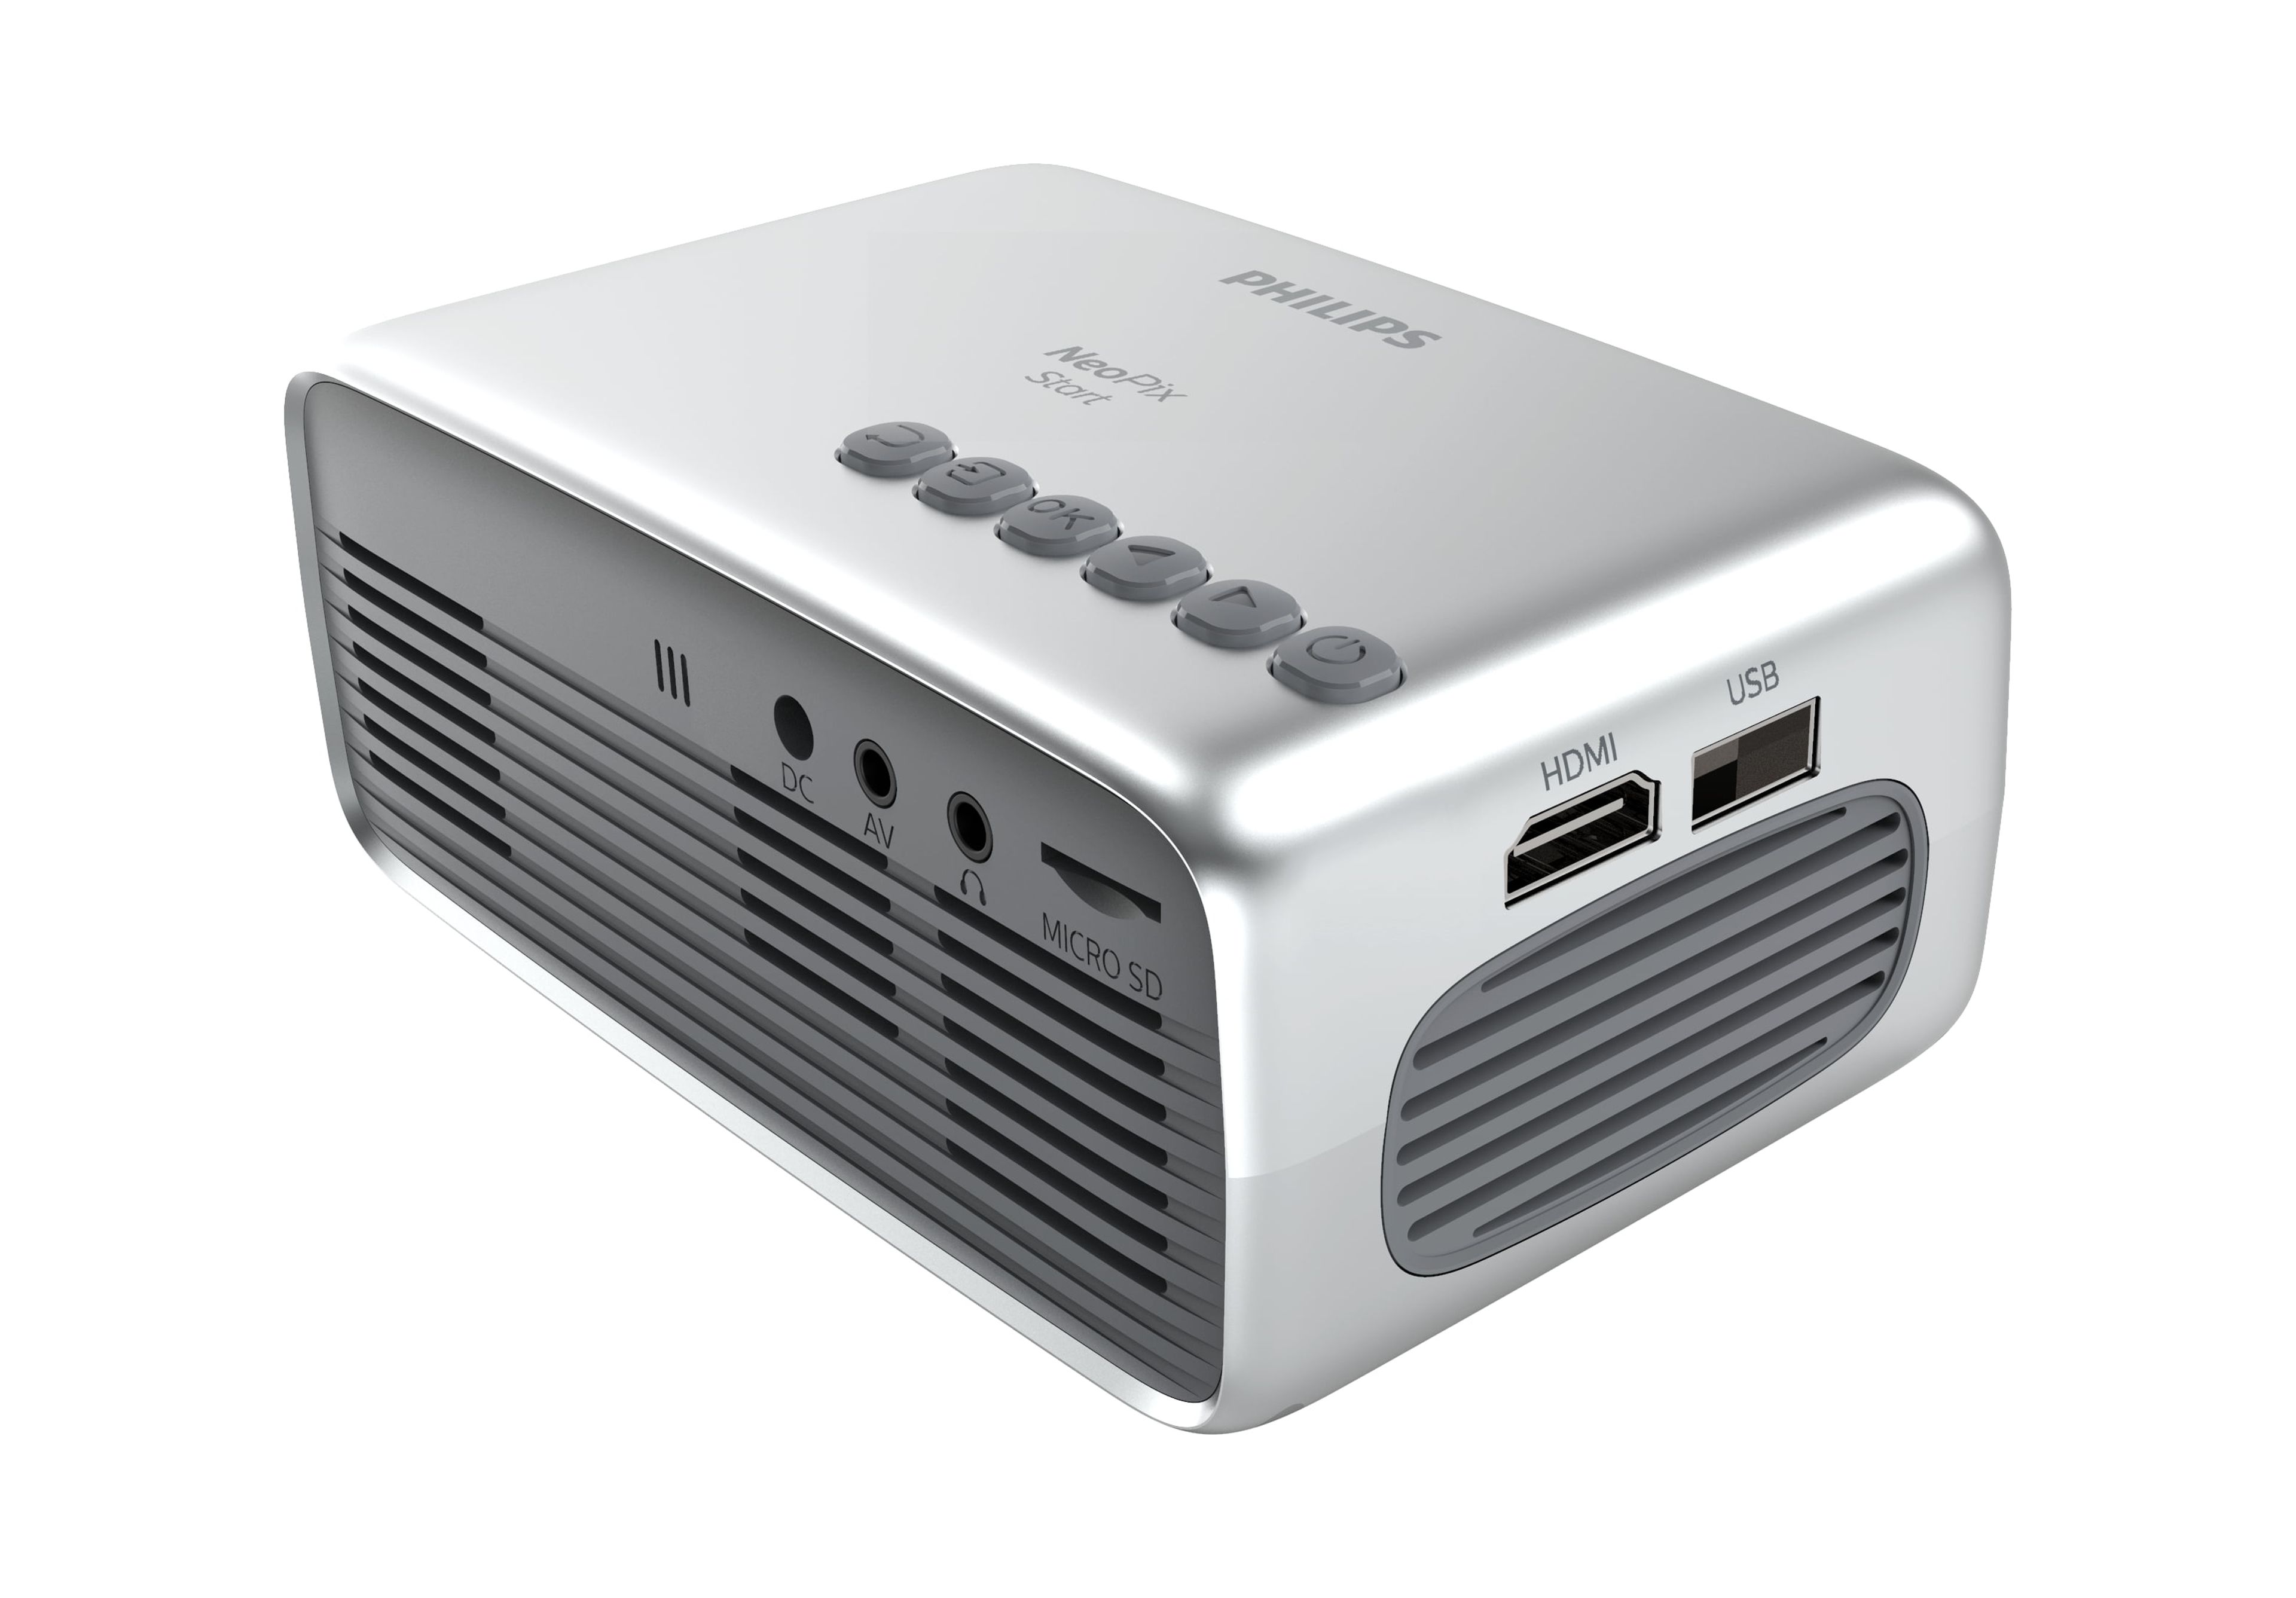 Philips NeoPix Start, Mini Projector, 60" Display, Built-in Media Player, HDMI, USB, micro SD, 3.5mm Audio Out Headphone Jack - image 3 of 3